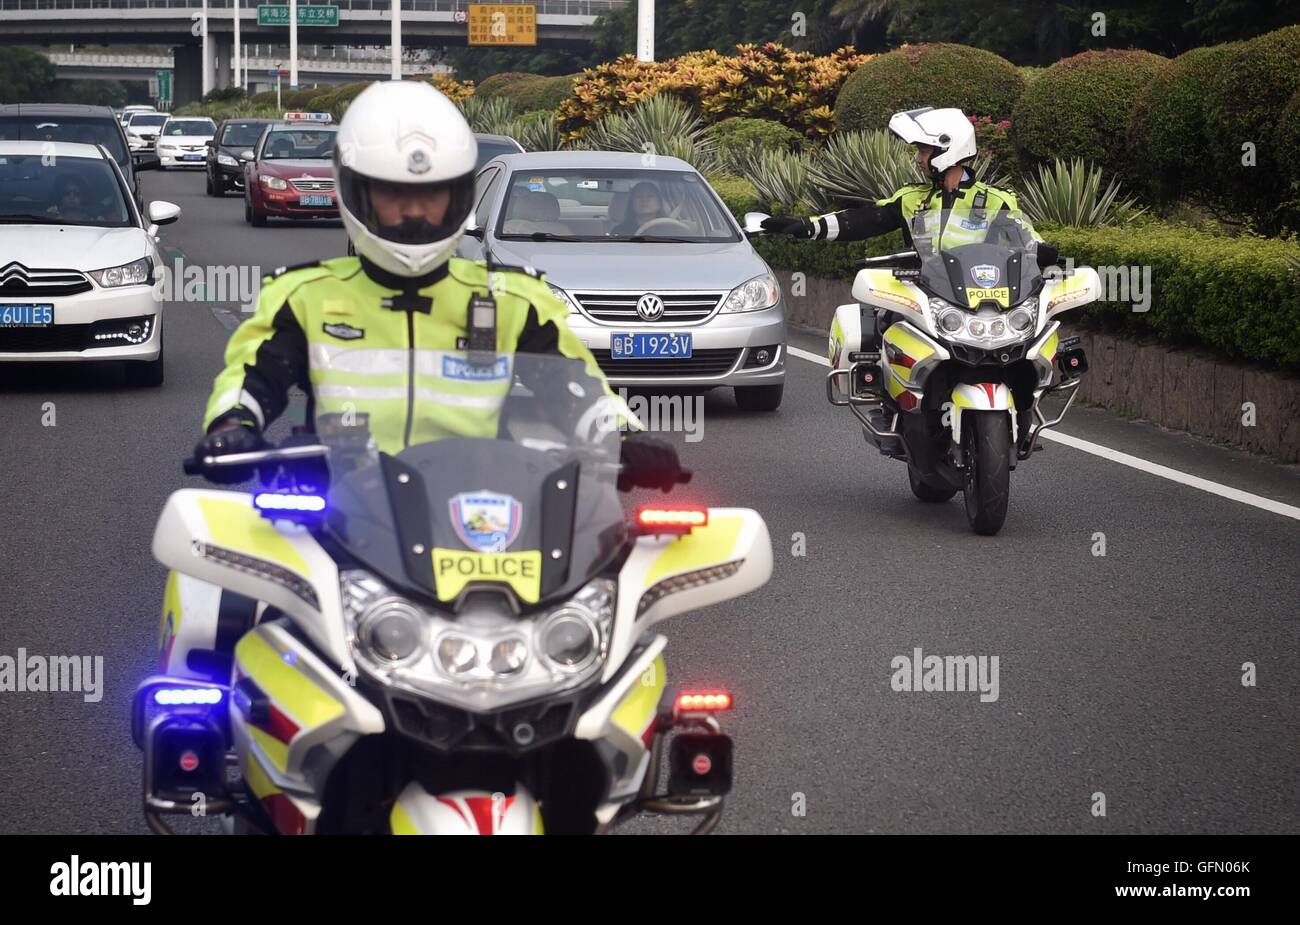 Shenzhen, China's Guangdong Province. 1st Aug, 2016. Traffic policemen patrol along a high-occupancy vehicle lane (HOV lane) in Shenzhen, south China's Guangdong Province, Aug. 1, 2016. Shenzhen's first HOV lane was put into use on Monday to increase average vehicle occupancy with the goal of reducing traffic congestion and air pollution. © Mao Siqian/Xinhua/Alamy Live News Stock Photo